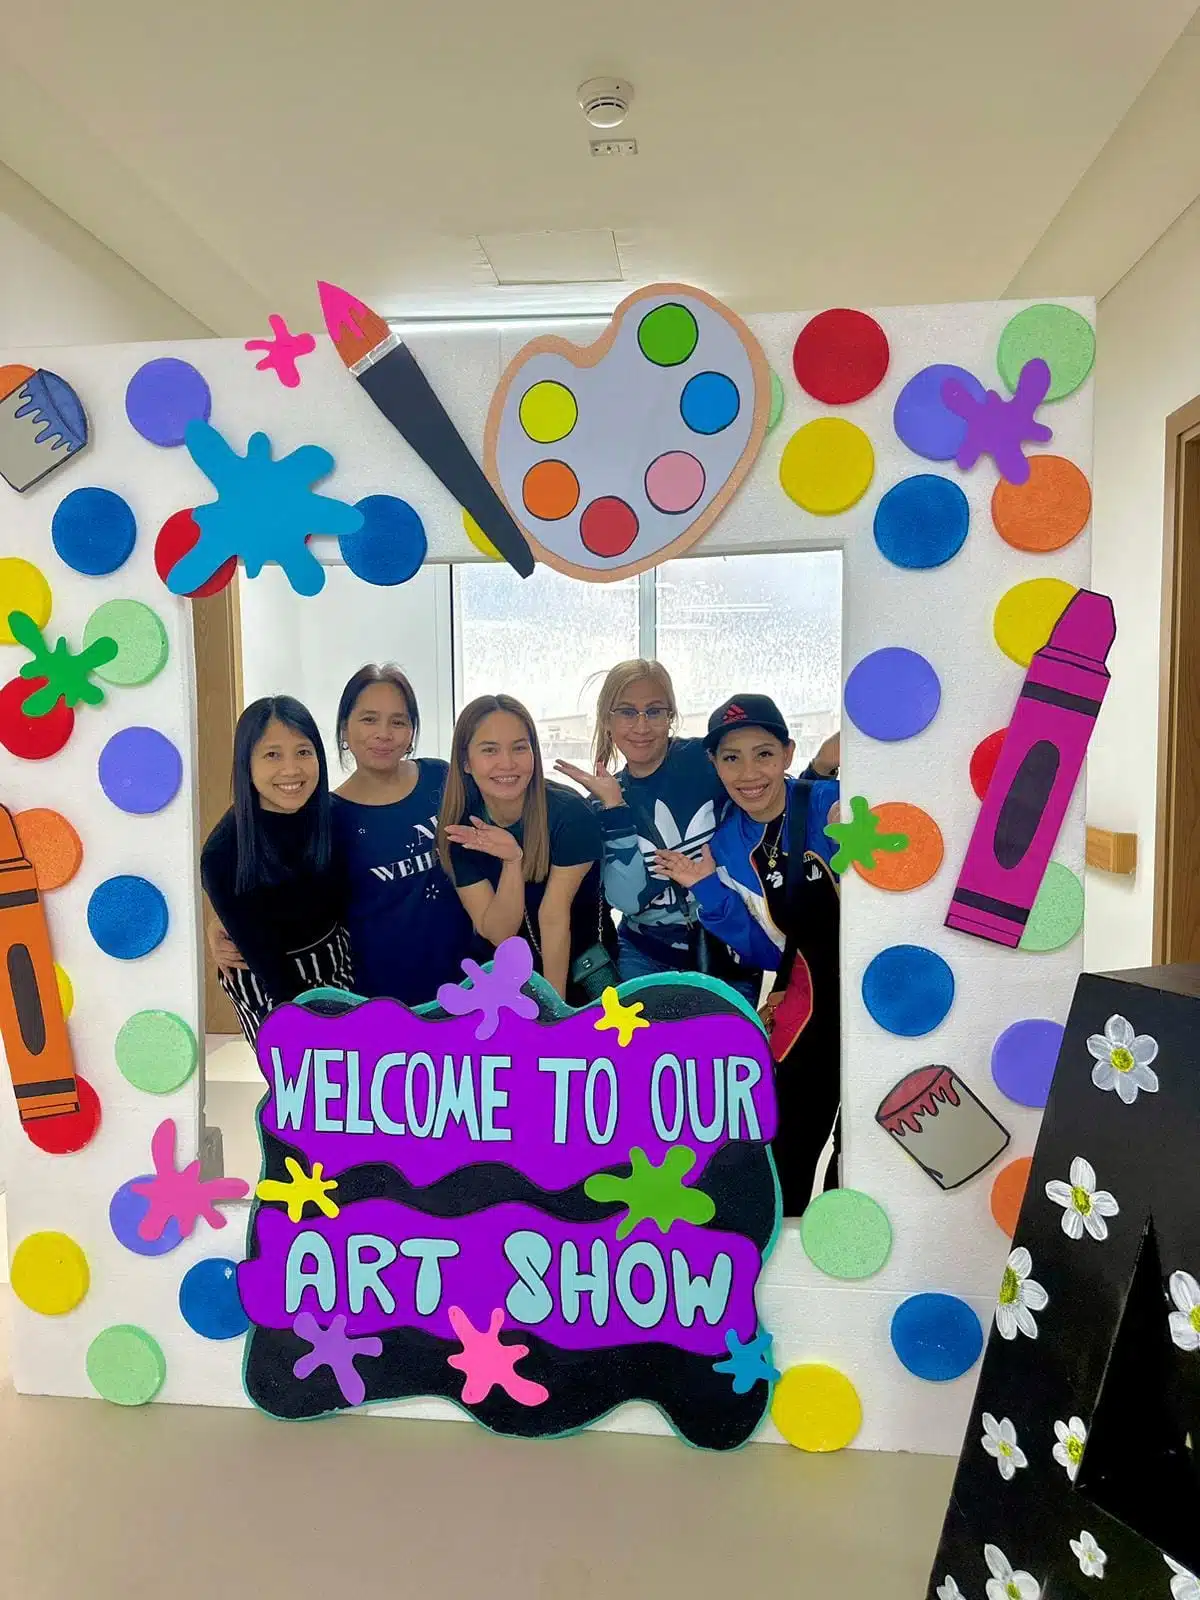 You are currently viewing Our School Art Show: A Celebration of Creativity!